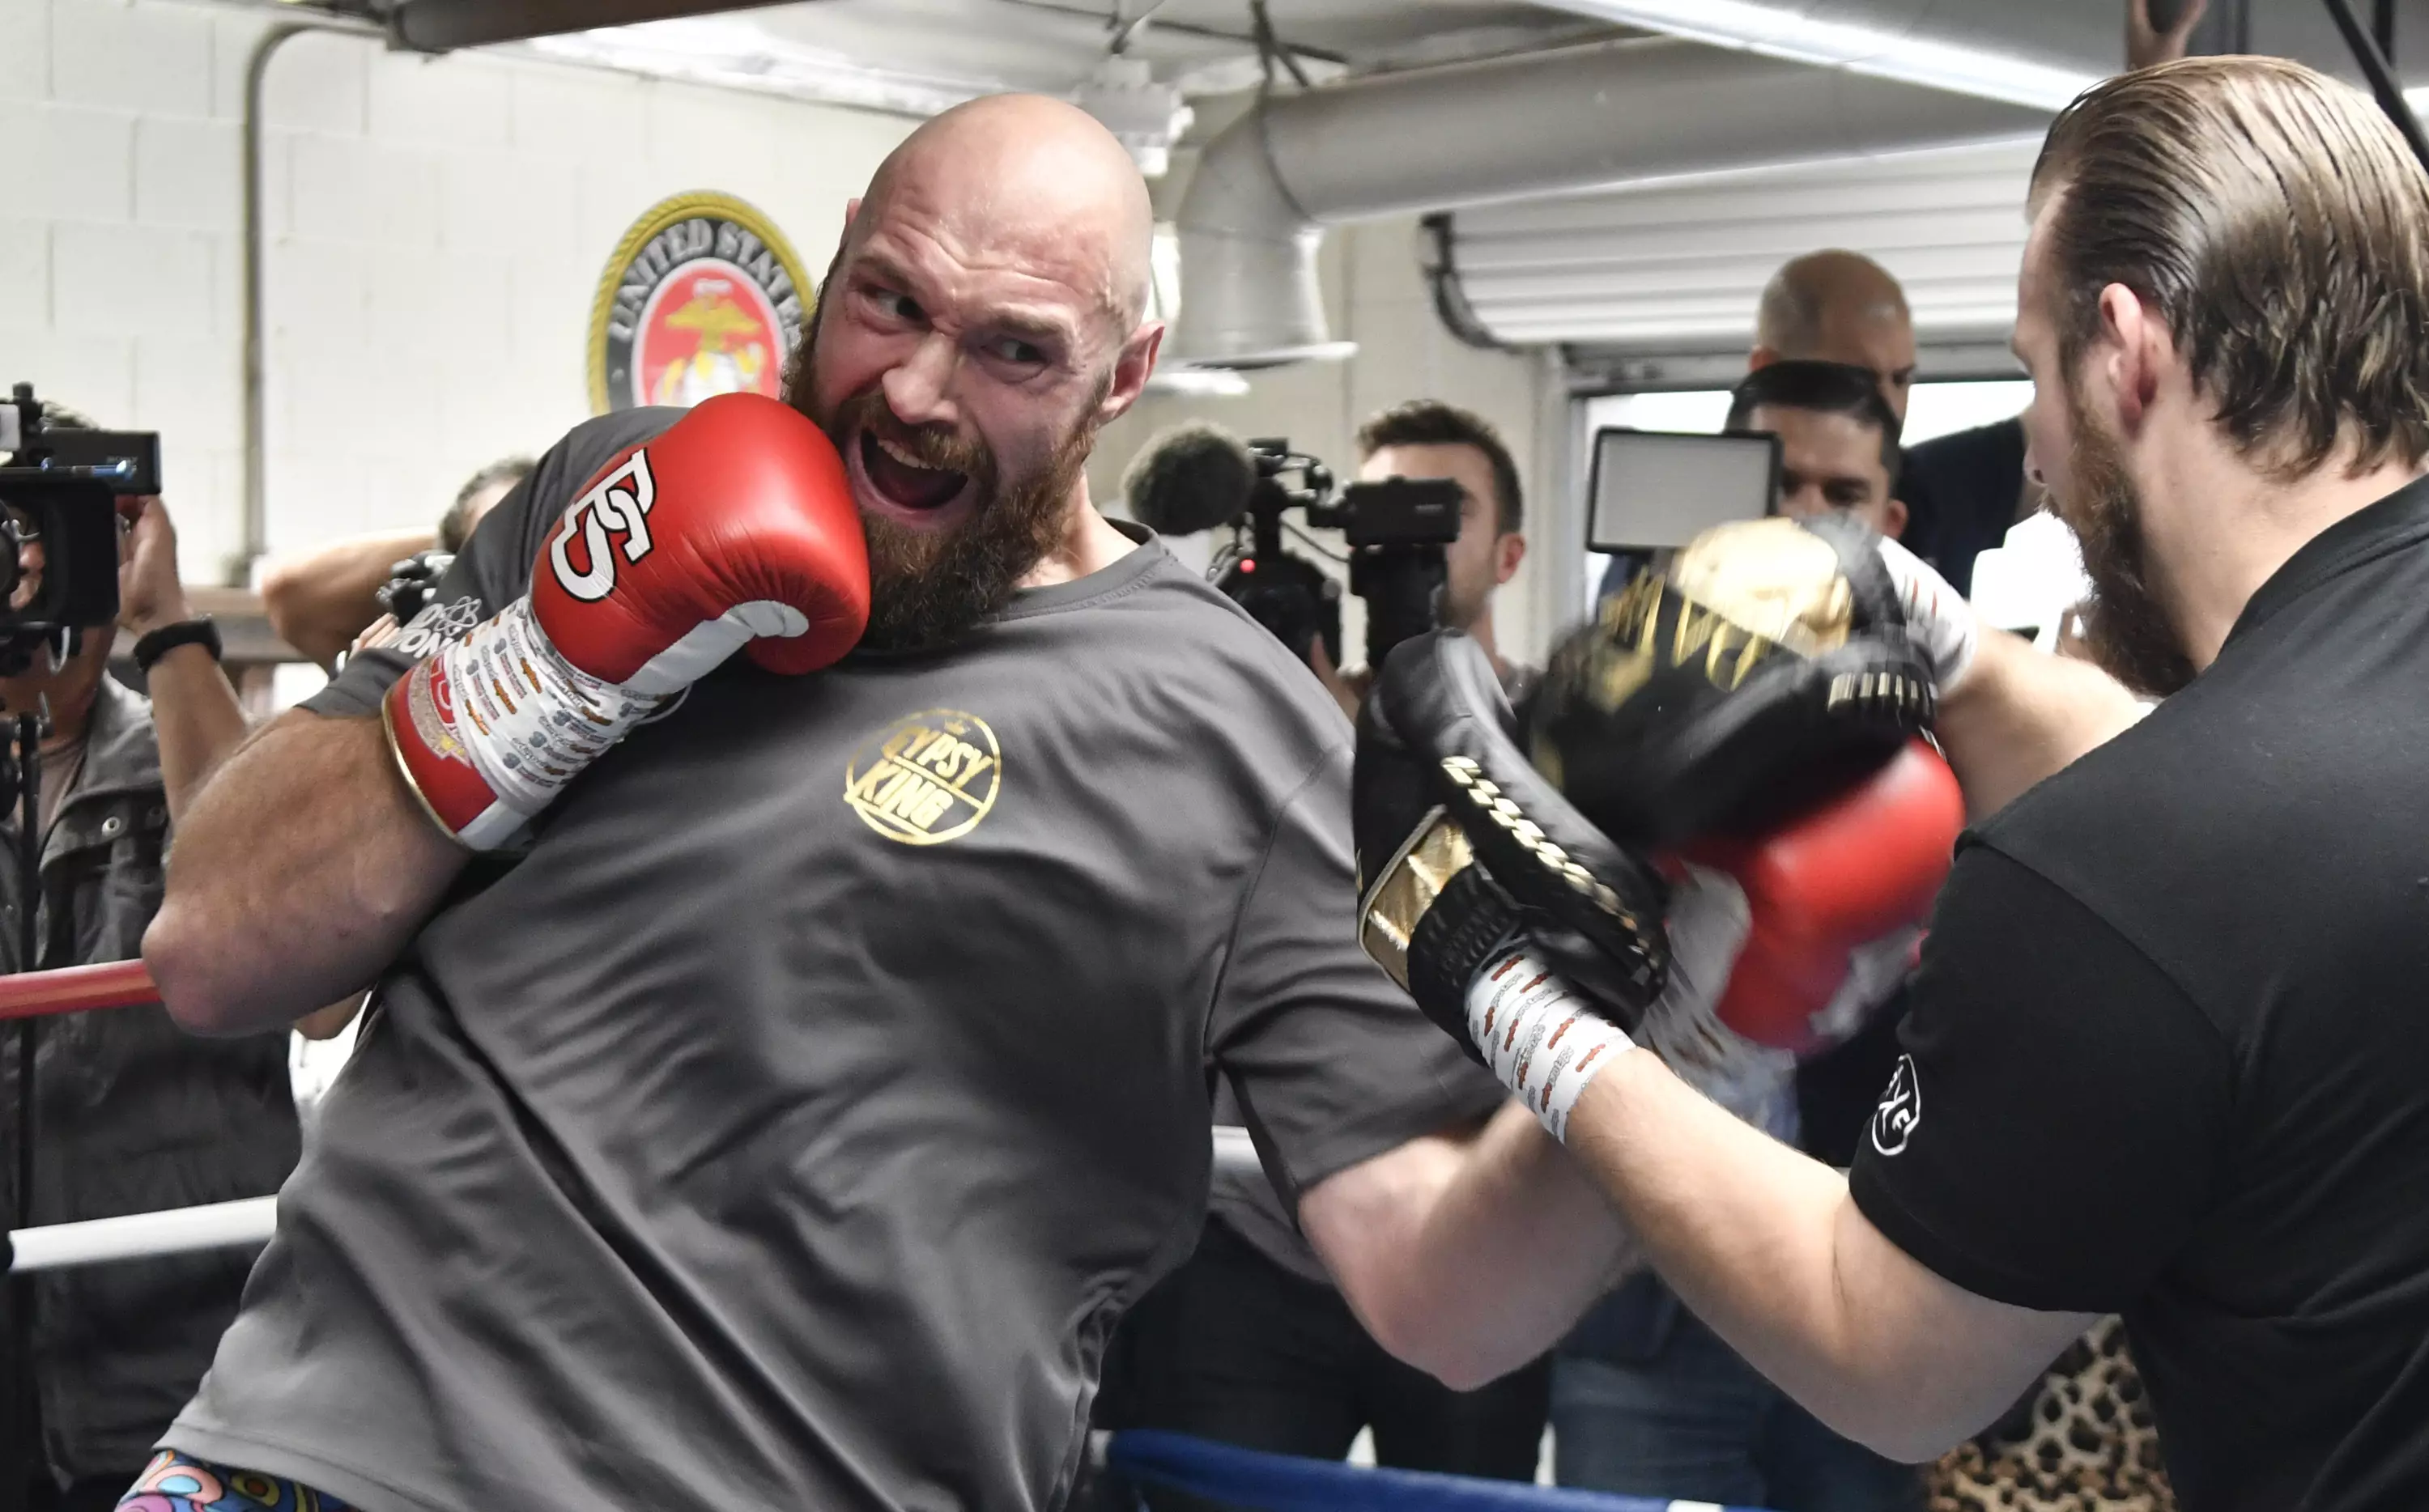 Tyson Fury will take on Deontay Wilder for the WBC heavyweight belt on December 1st in Los Angeles.